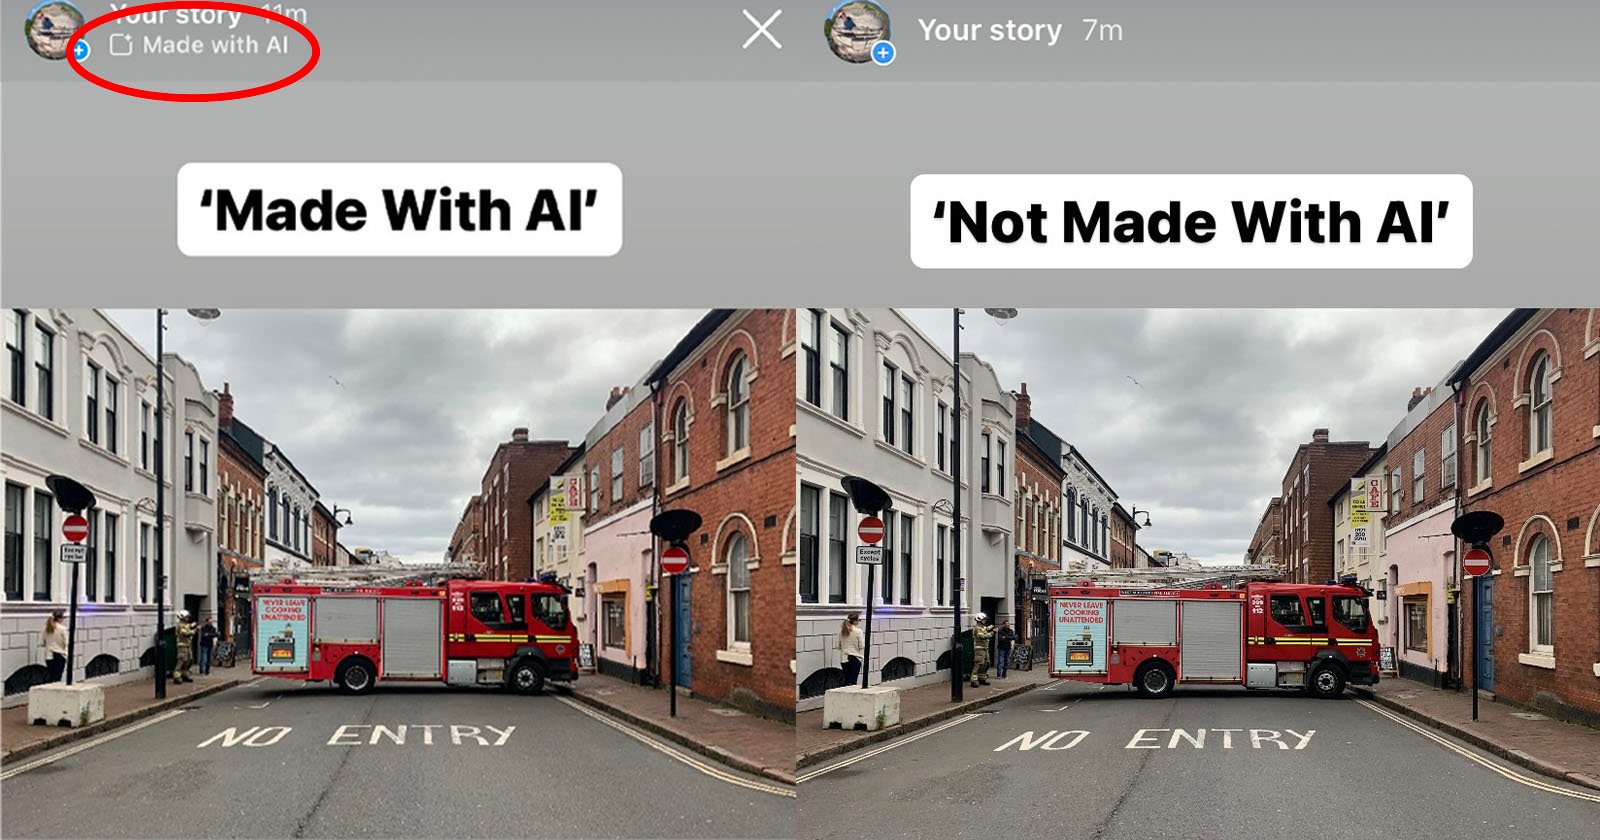 A split-screen image comparing two photos of the same street. The left side, labeled Made With AI, features a street with a red firetruck. The right side, labeled Not Made With AI, shows the same street without the firetruck.